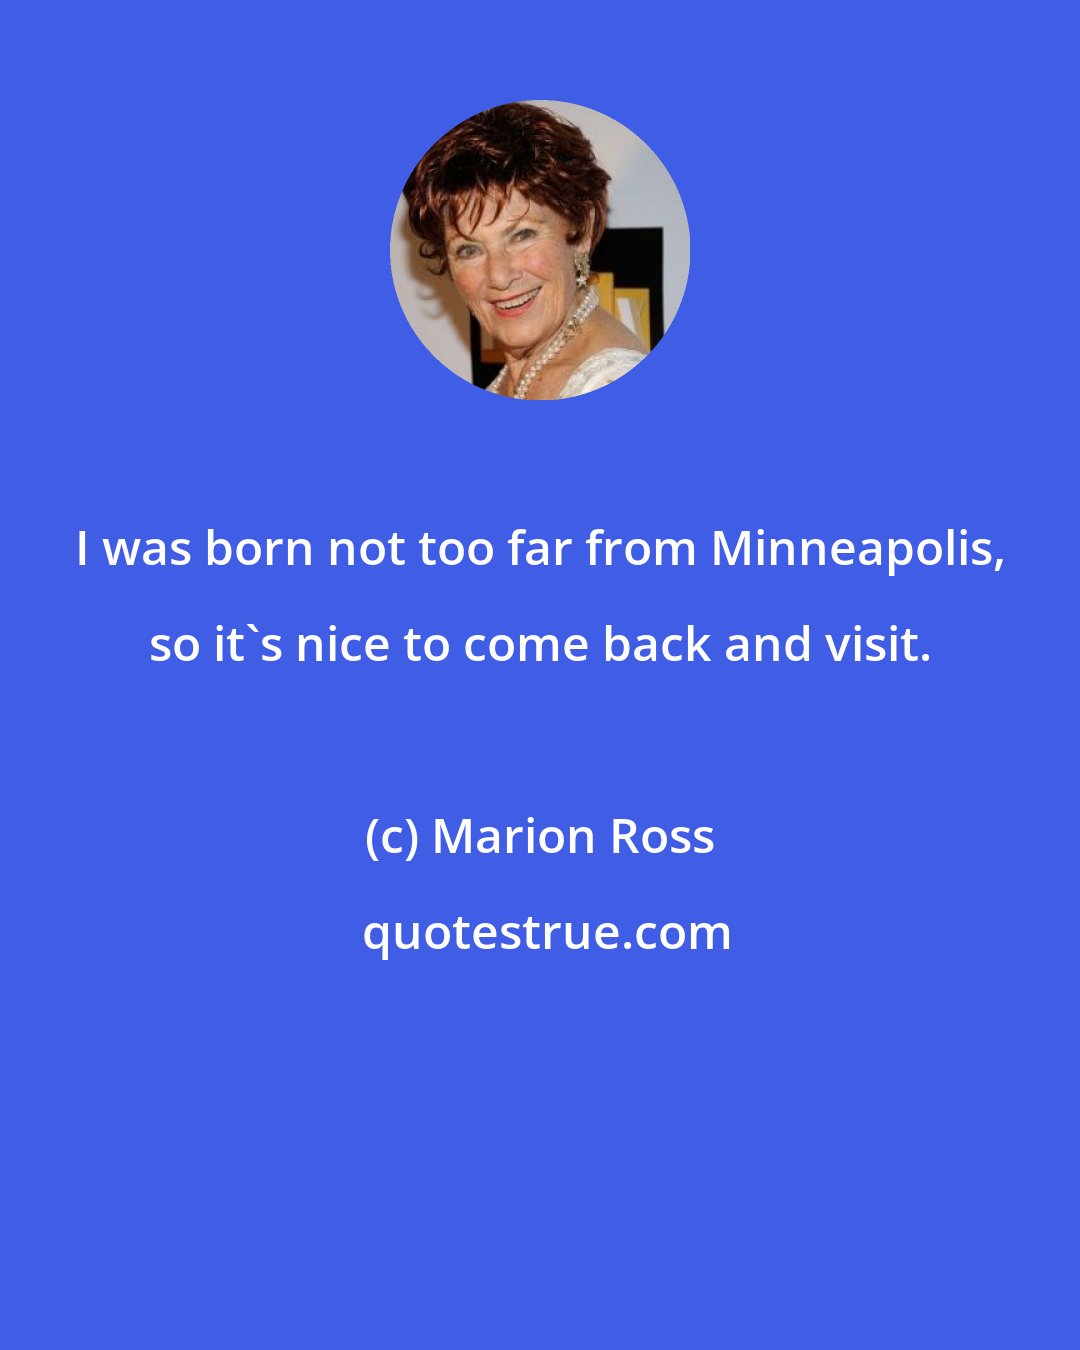 Marion Ross: I was born not too far from Minneapolis, so it's nice to come back and visit.